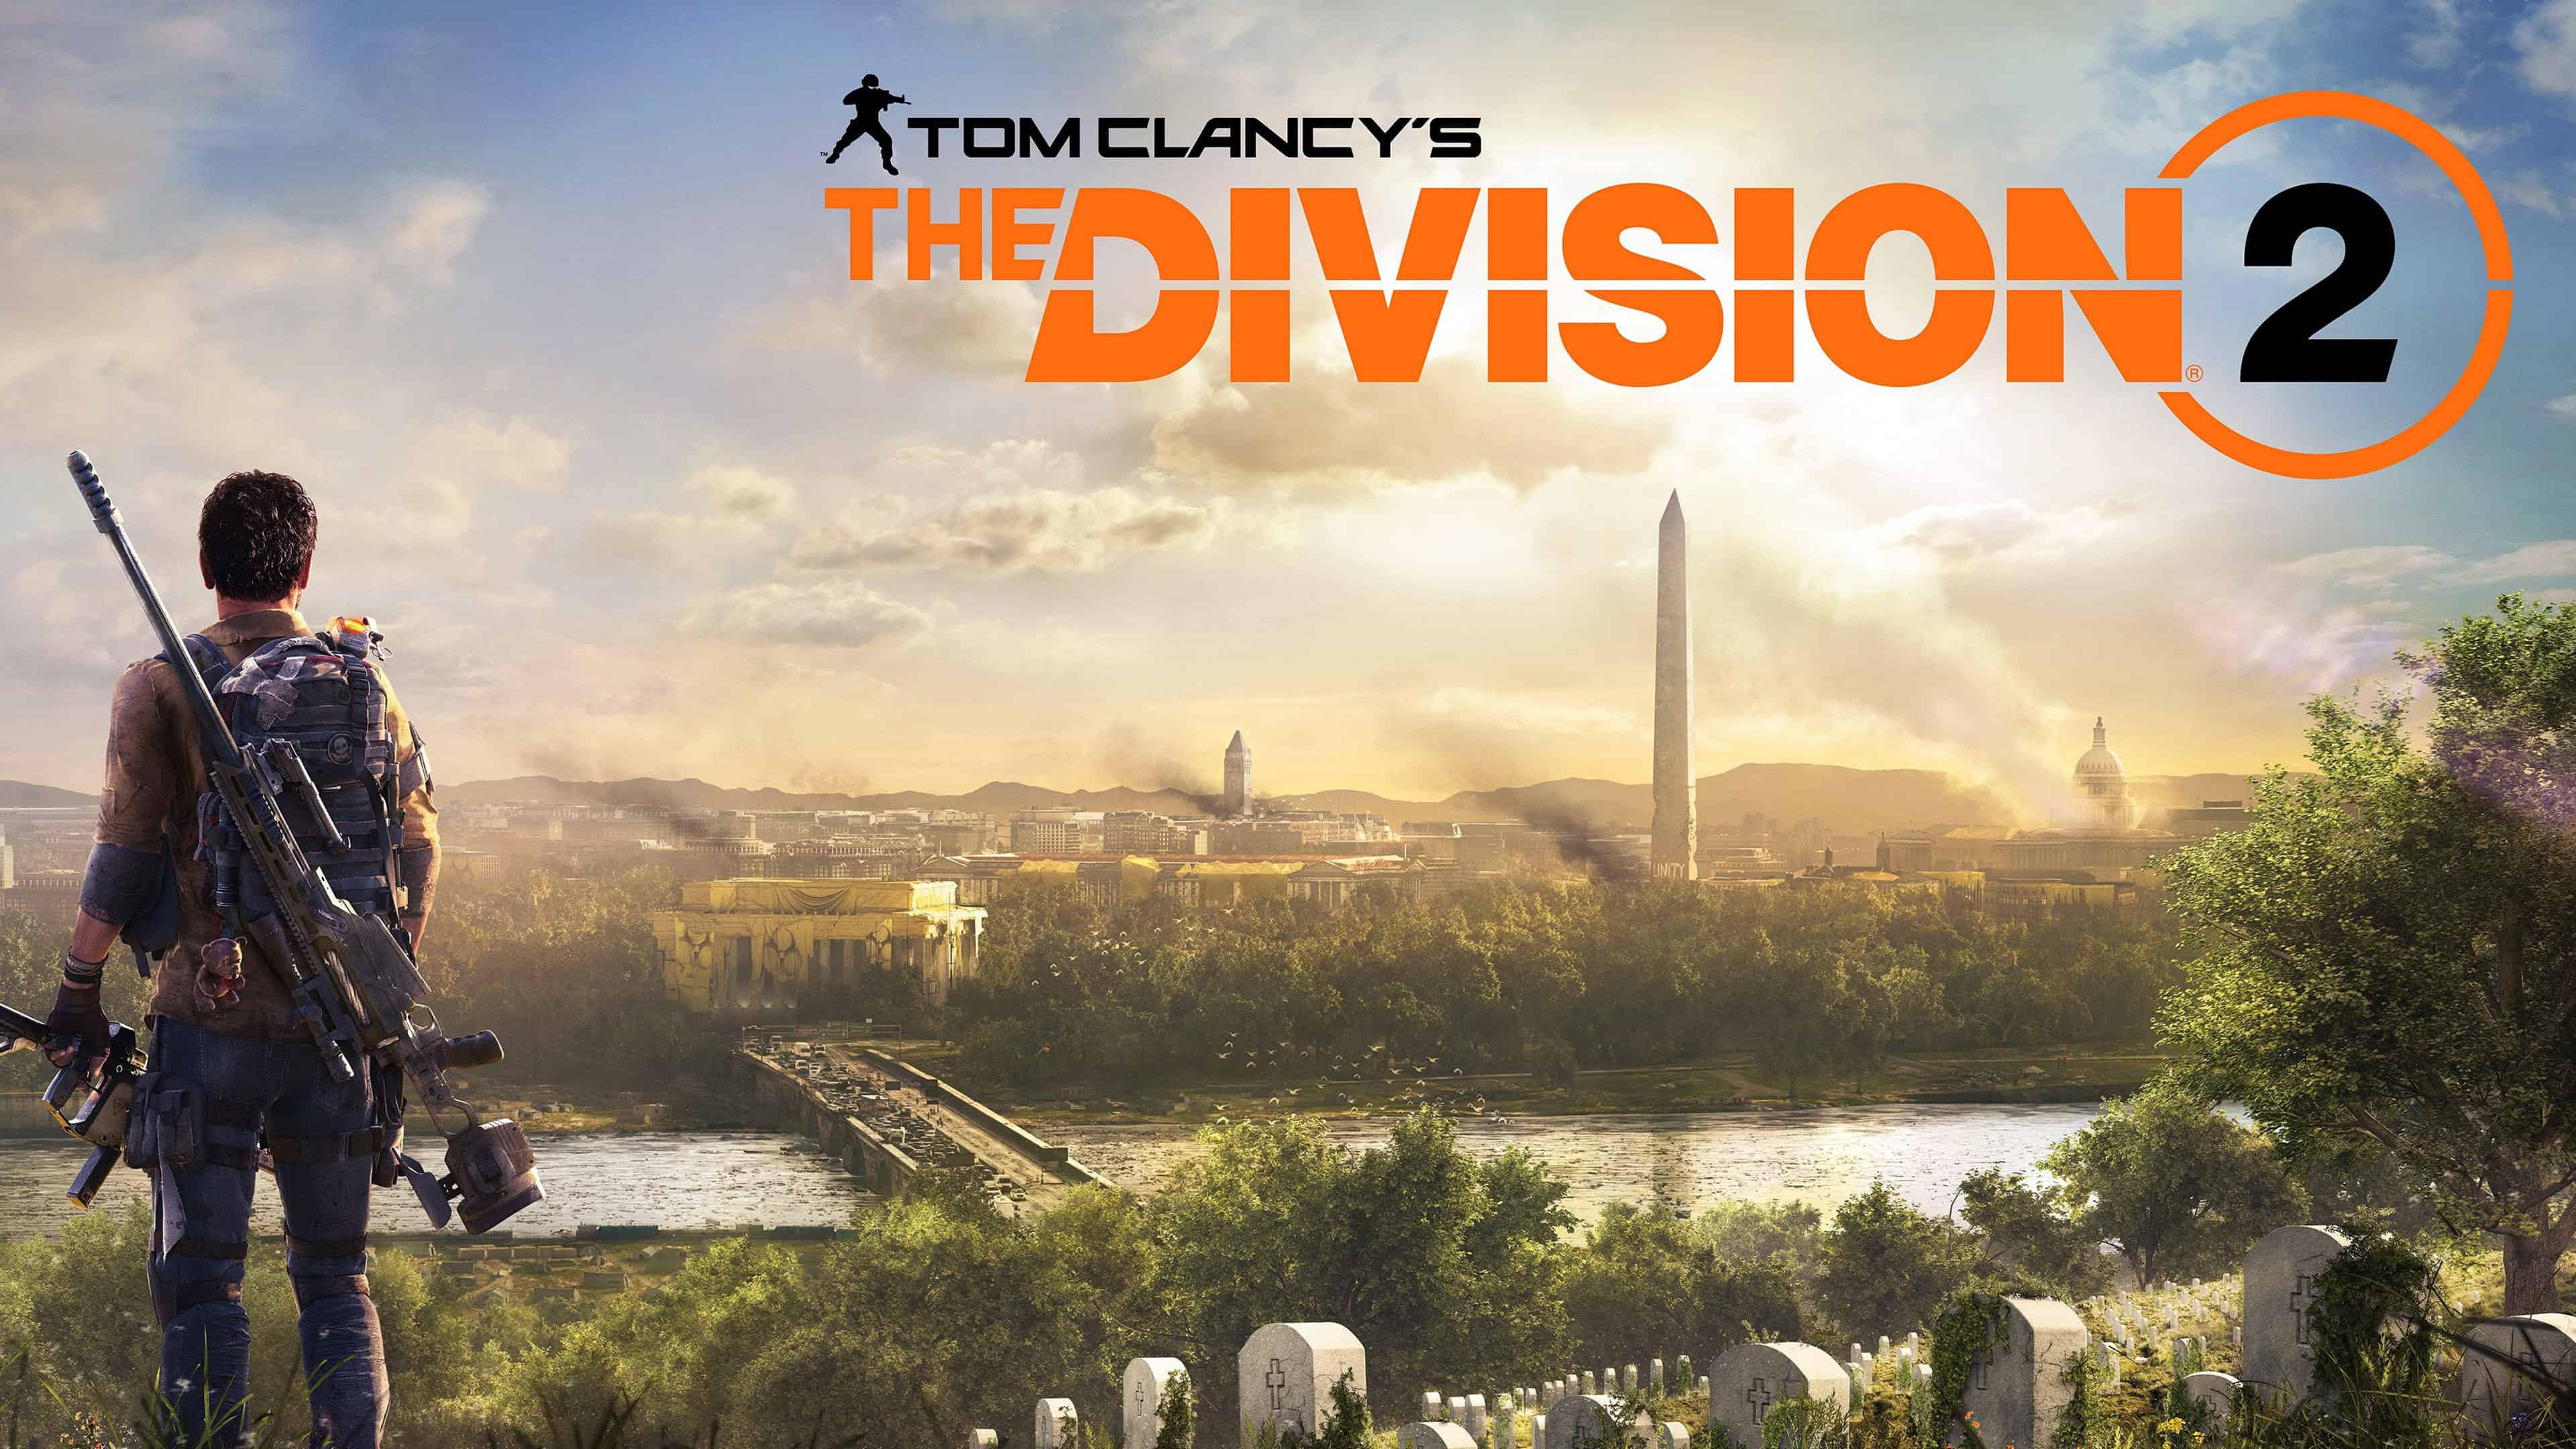 Tom Clancy The Division 2 Poster Uhd 4k Wallpaper - Tom Clancy's The Division 2 - HD Wallpaper 